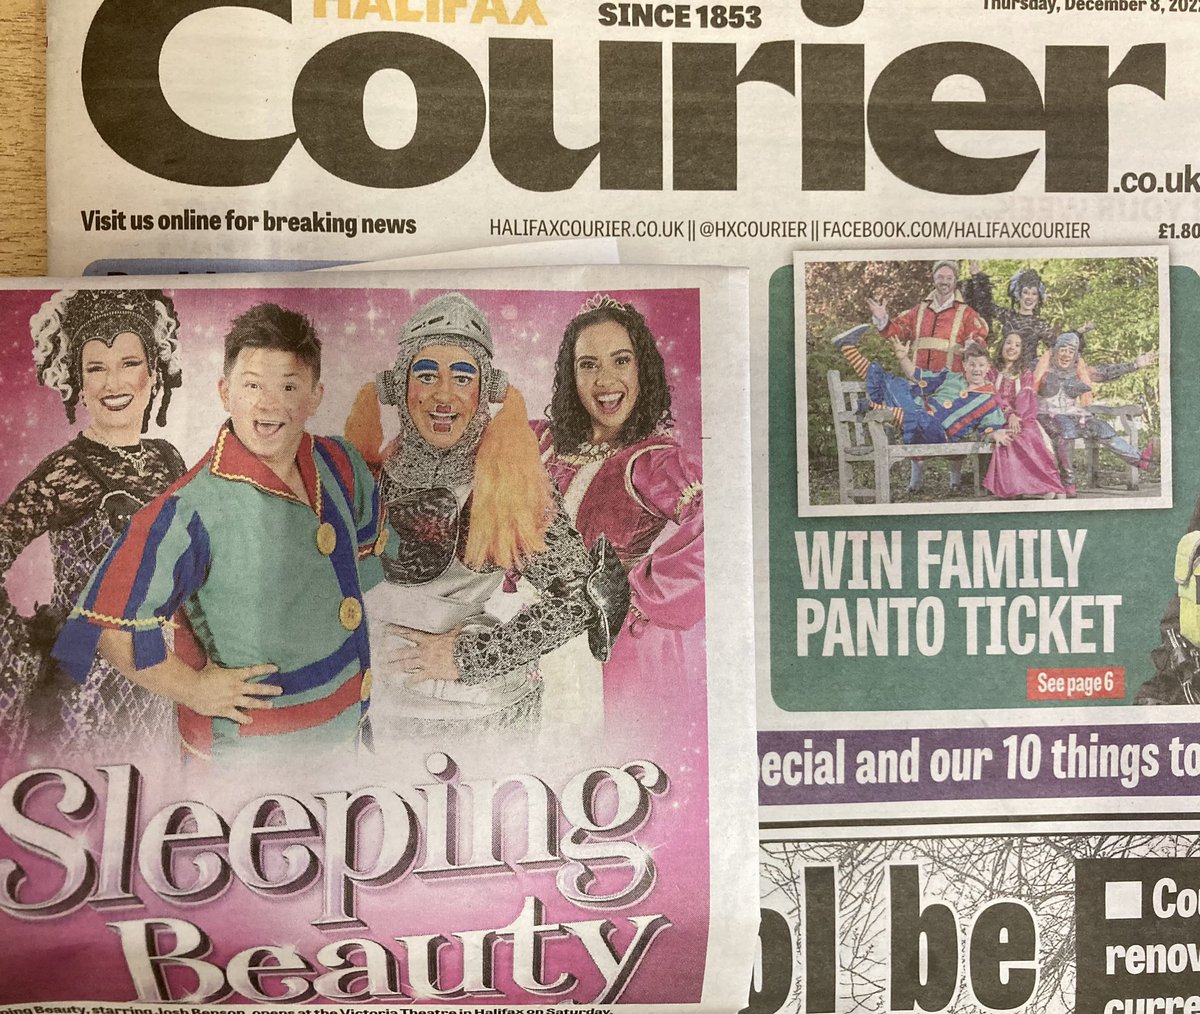 Pick up a copy of this week’s @HXCourier to read all about Sleeping Beauty at the Victoria Theatre- there’s also a chance for you to win a family ticket to the show! #HalifaxPanto